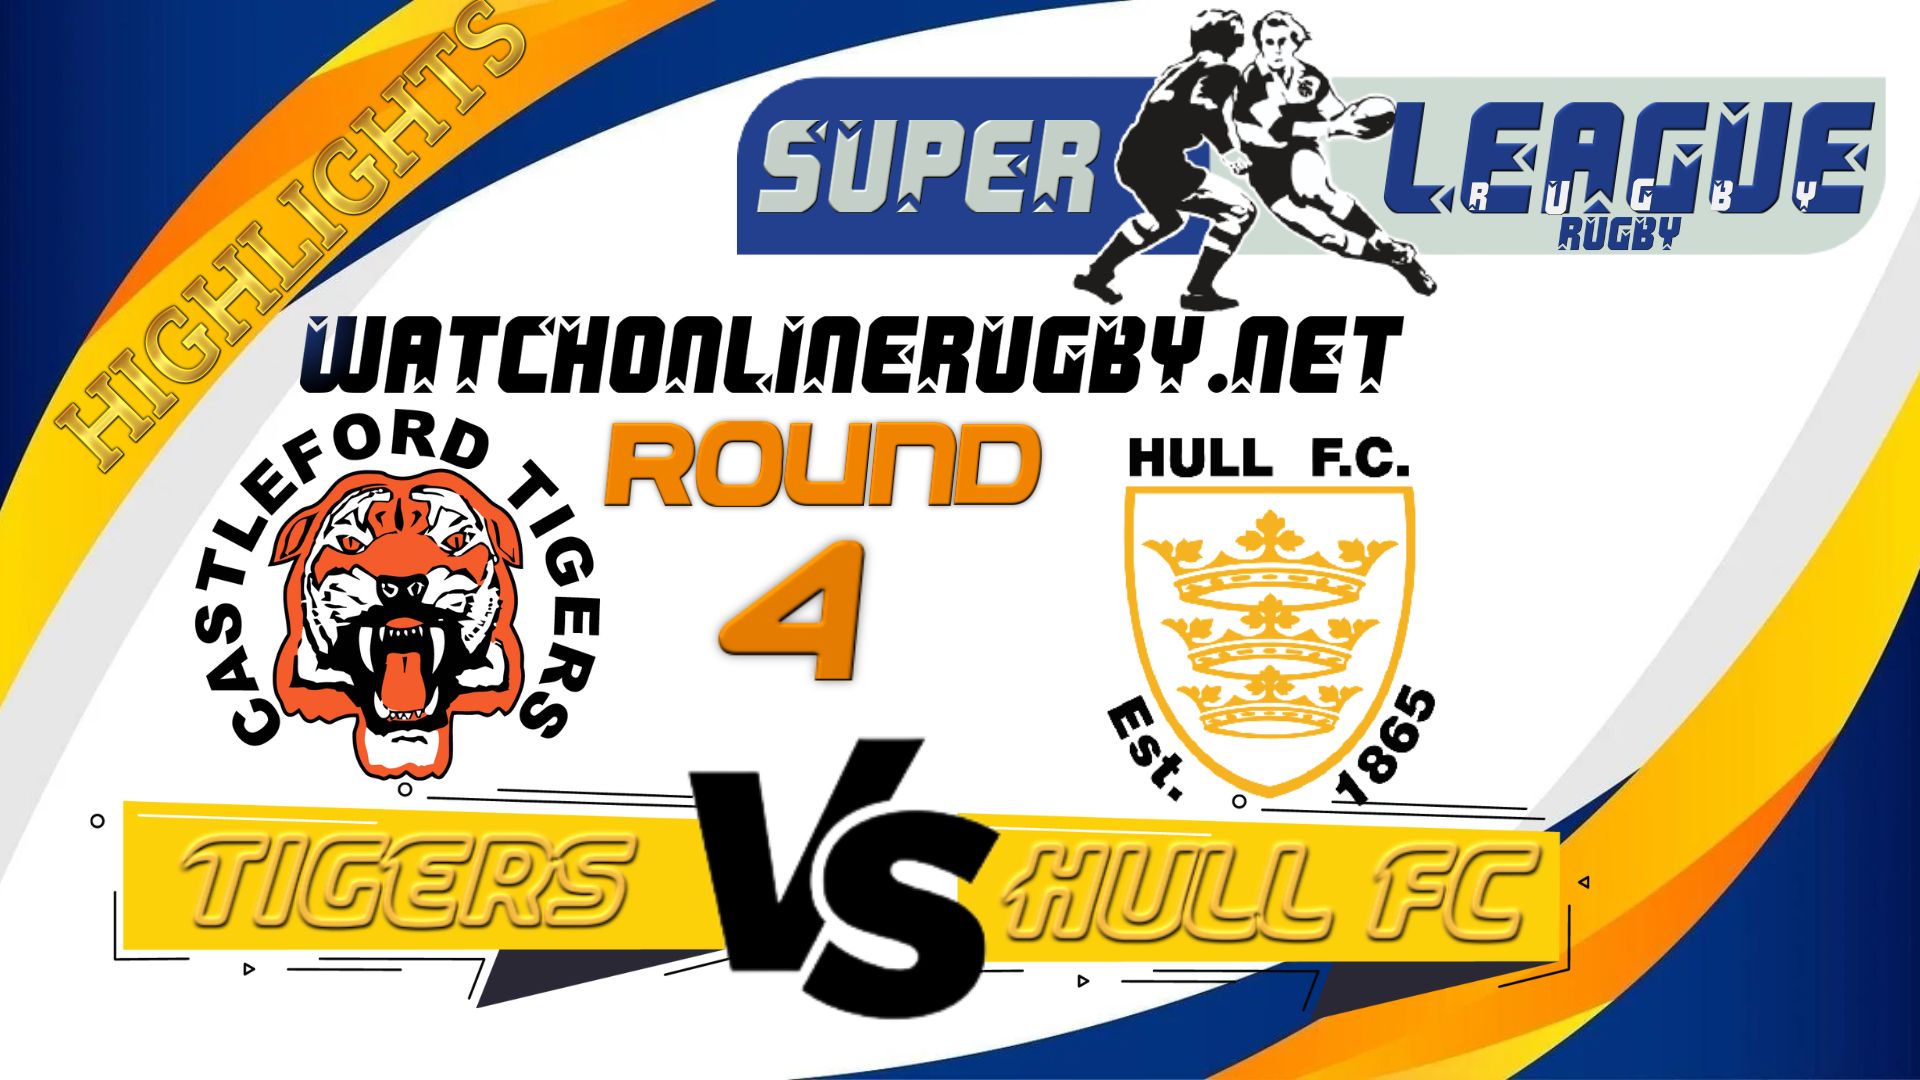 Castleford Tigers Vs Hull FC Super League Rugby 2022 RD 4